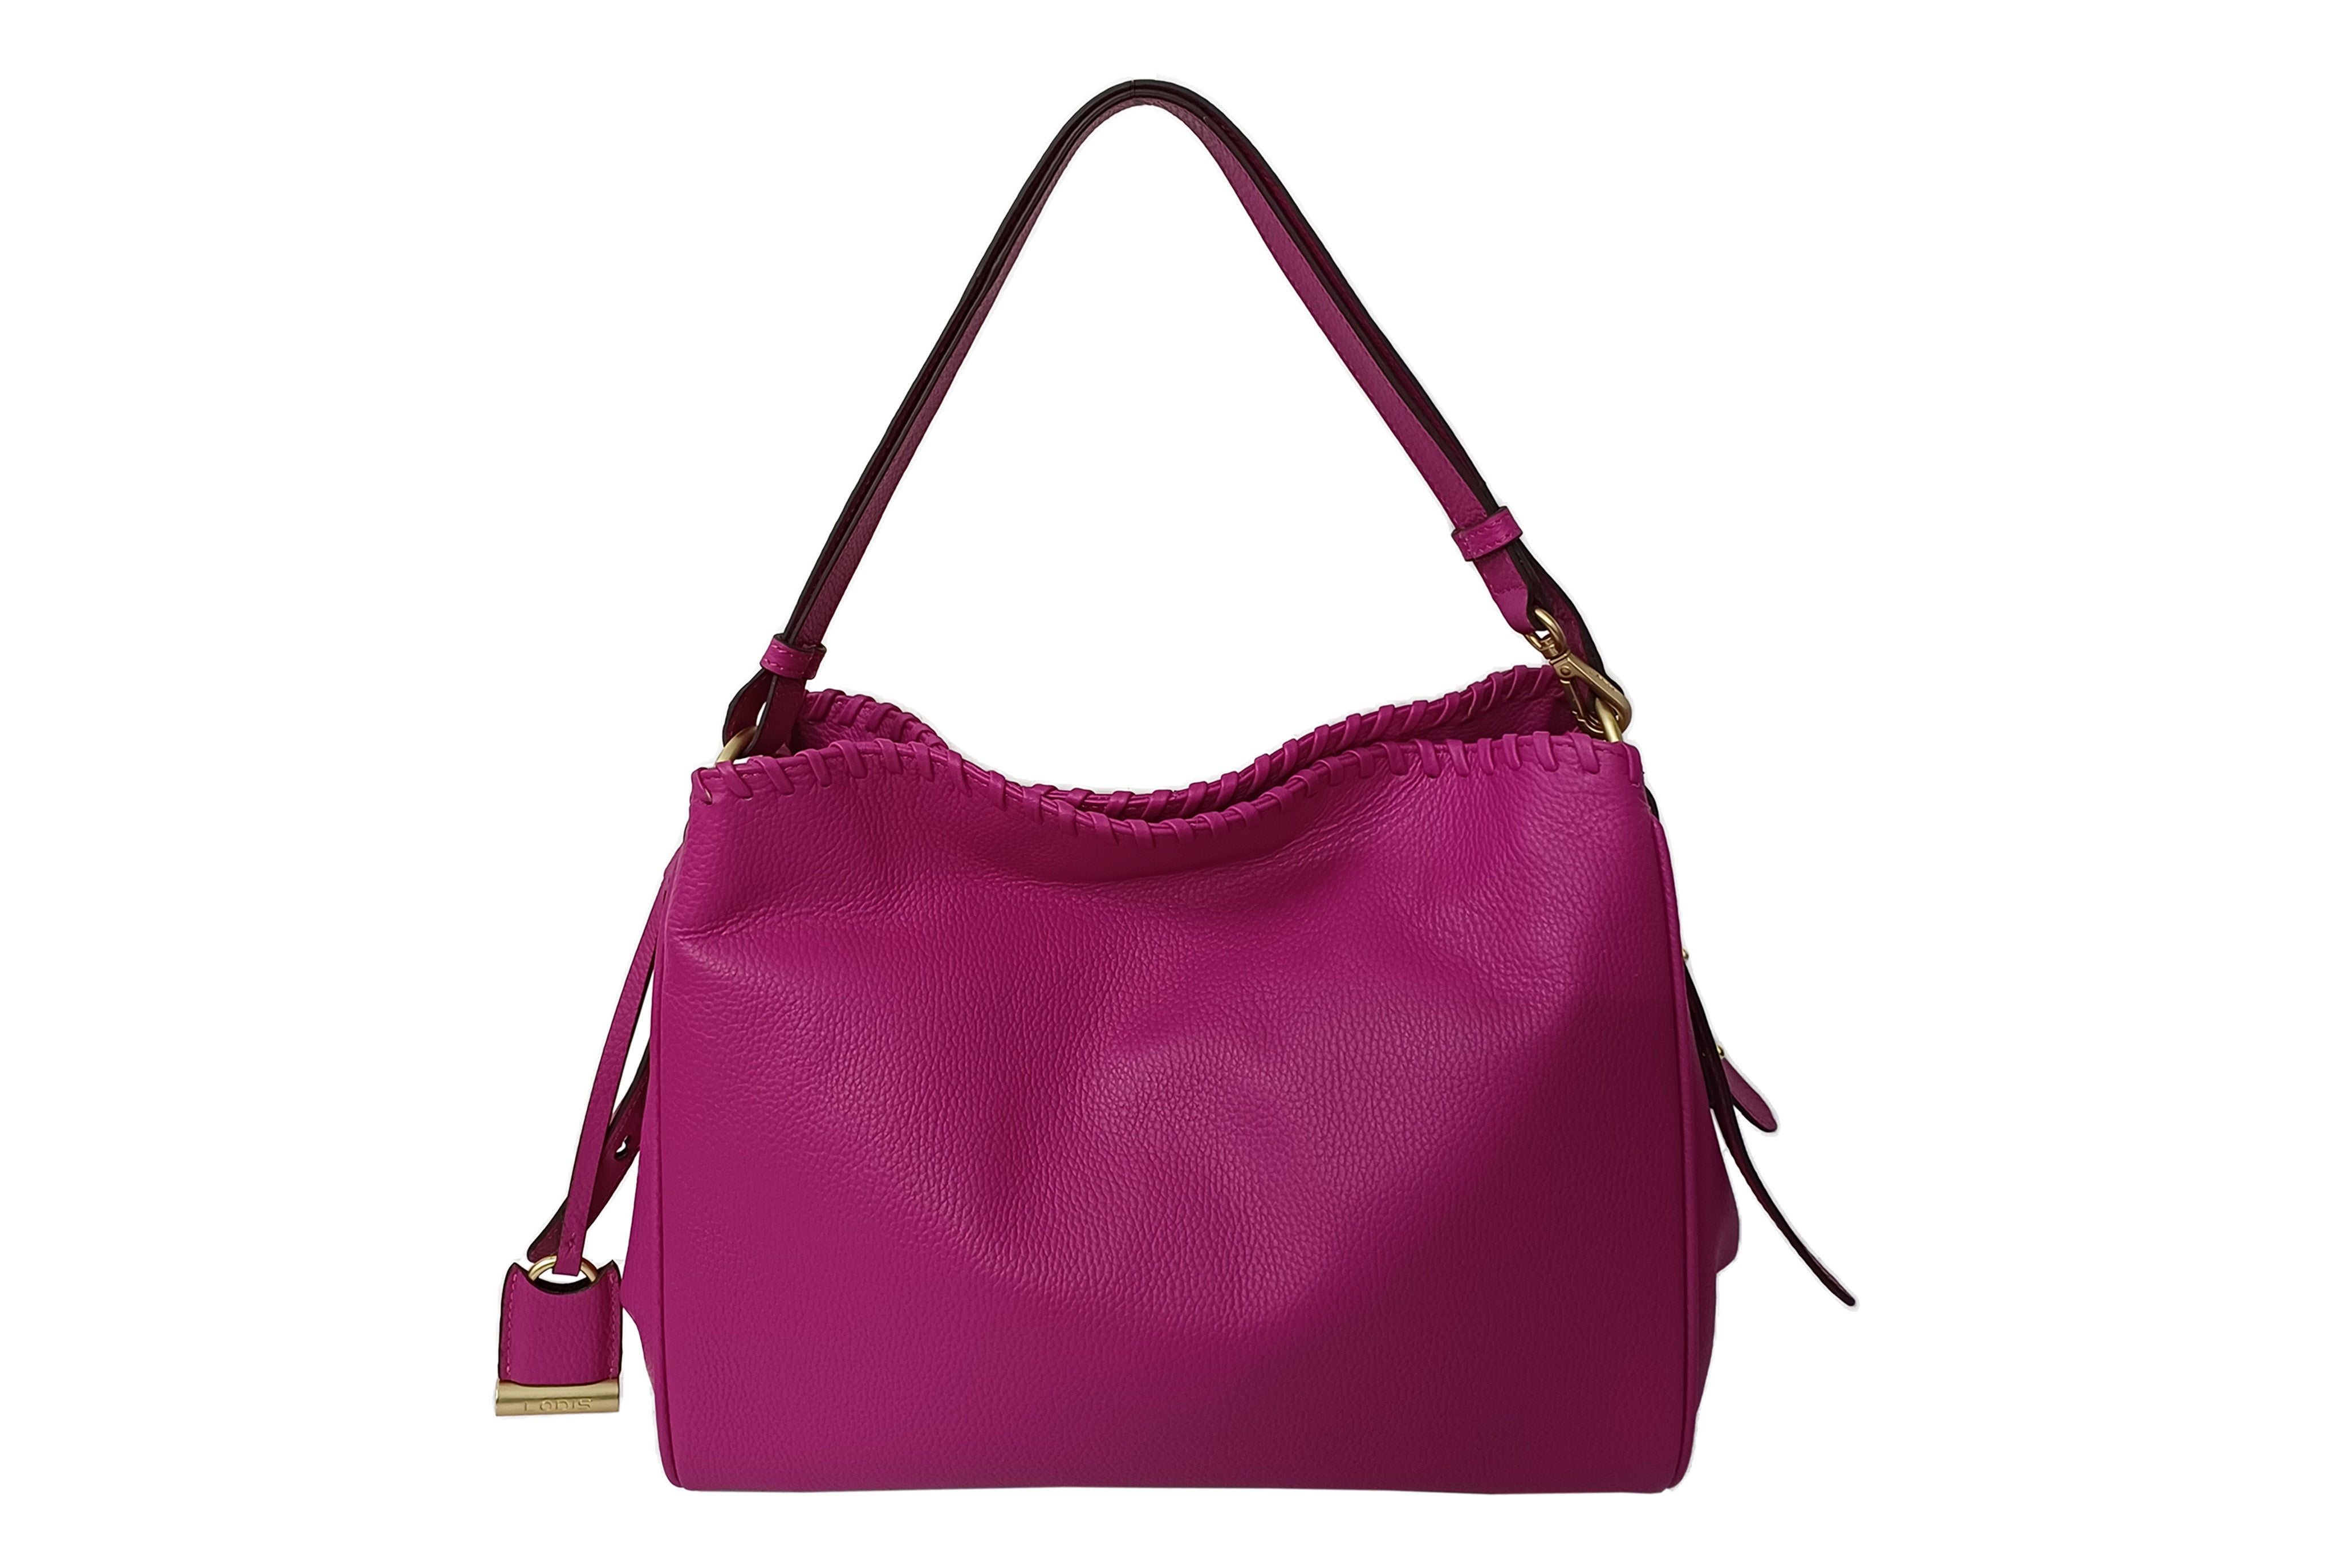 Shop the Luxurious Evelyn Shoulder Bag At unbelievable prices | Lodis